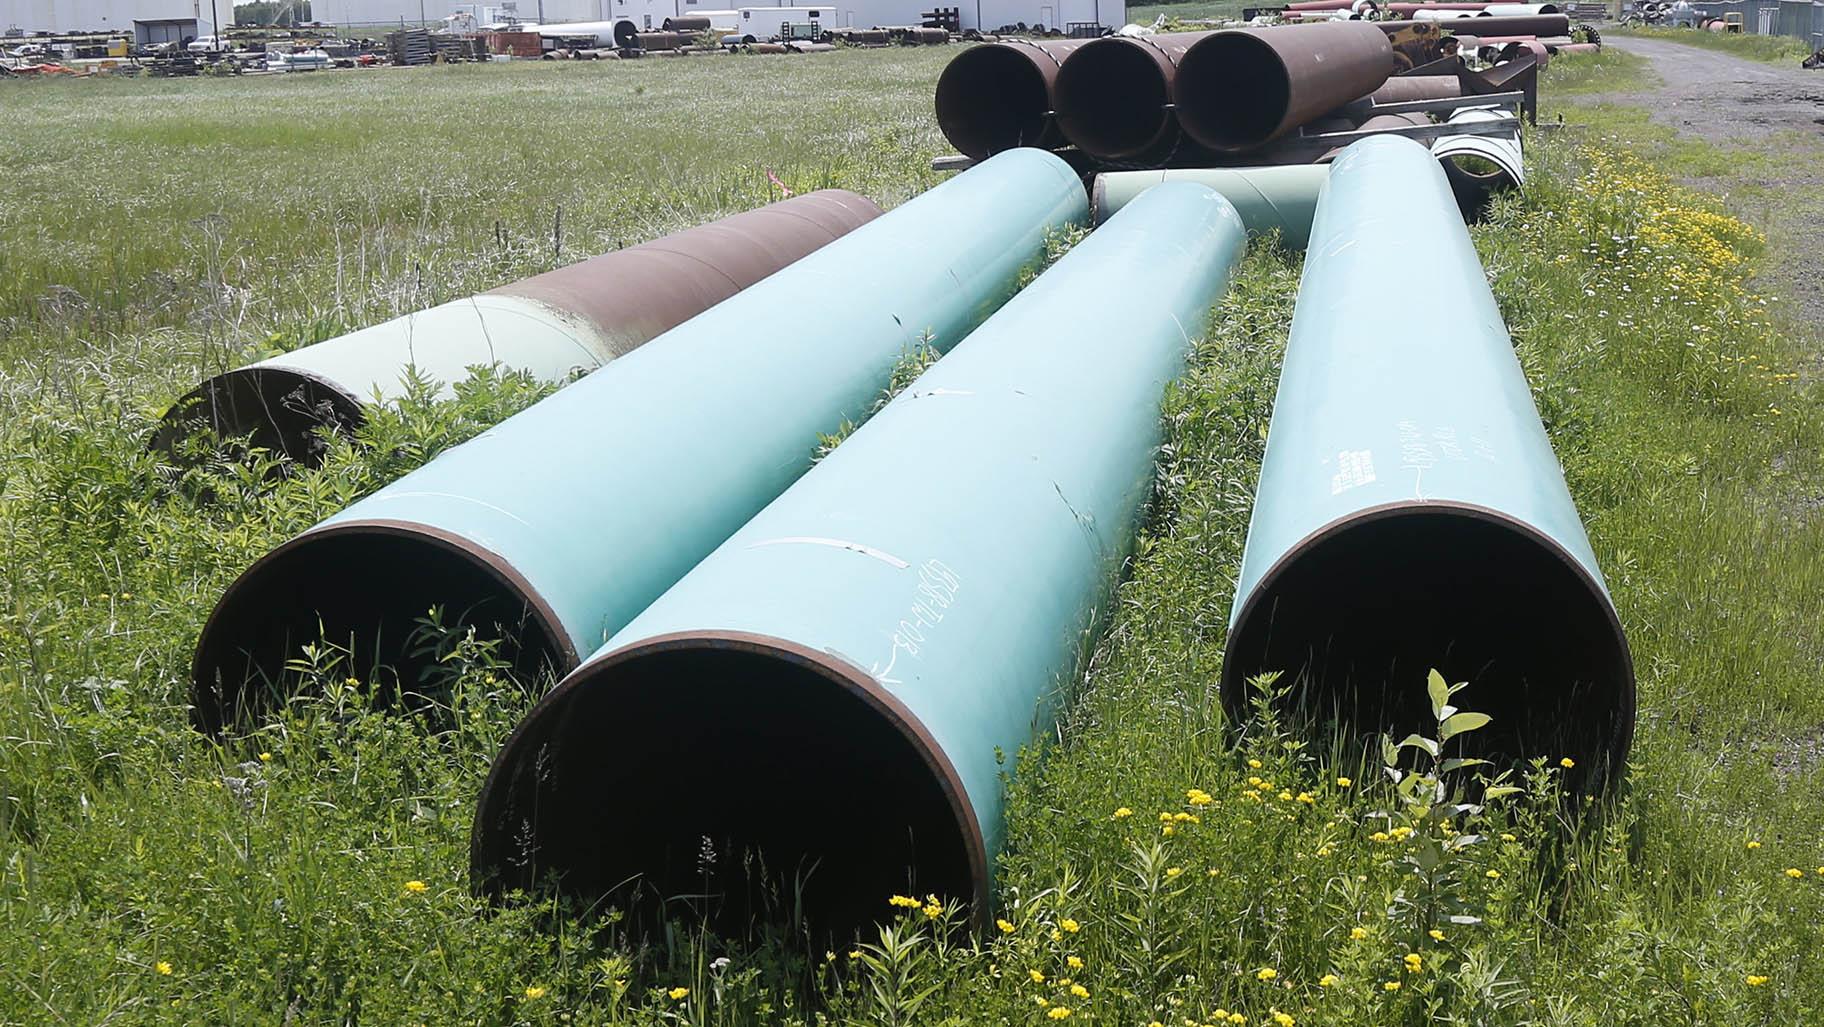 Pipeline used to carry crude oil is shown at the Superior, Wis., terminal of Enbridge Energy, June 29, 2018. (AP Photo / Jim Mone, File)